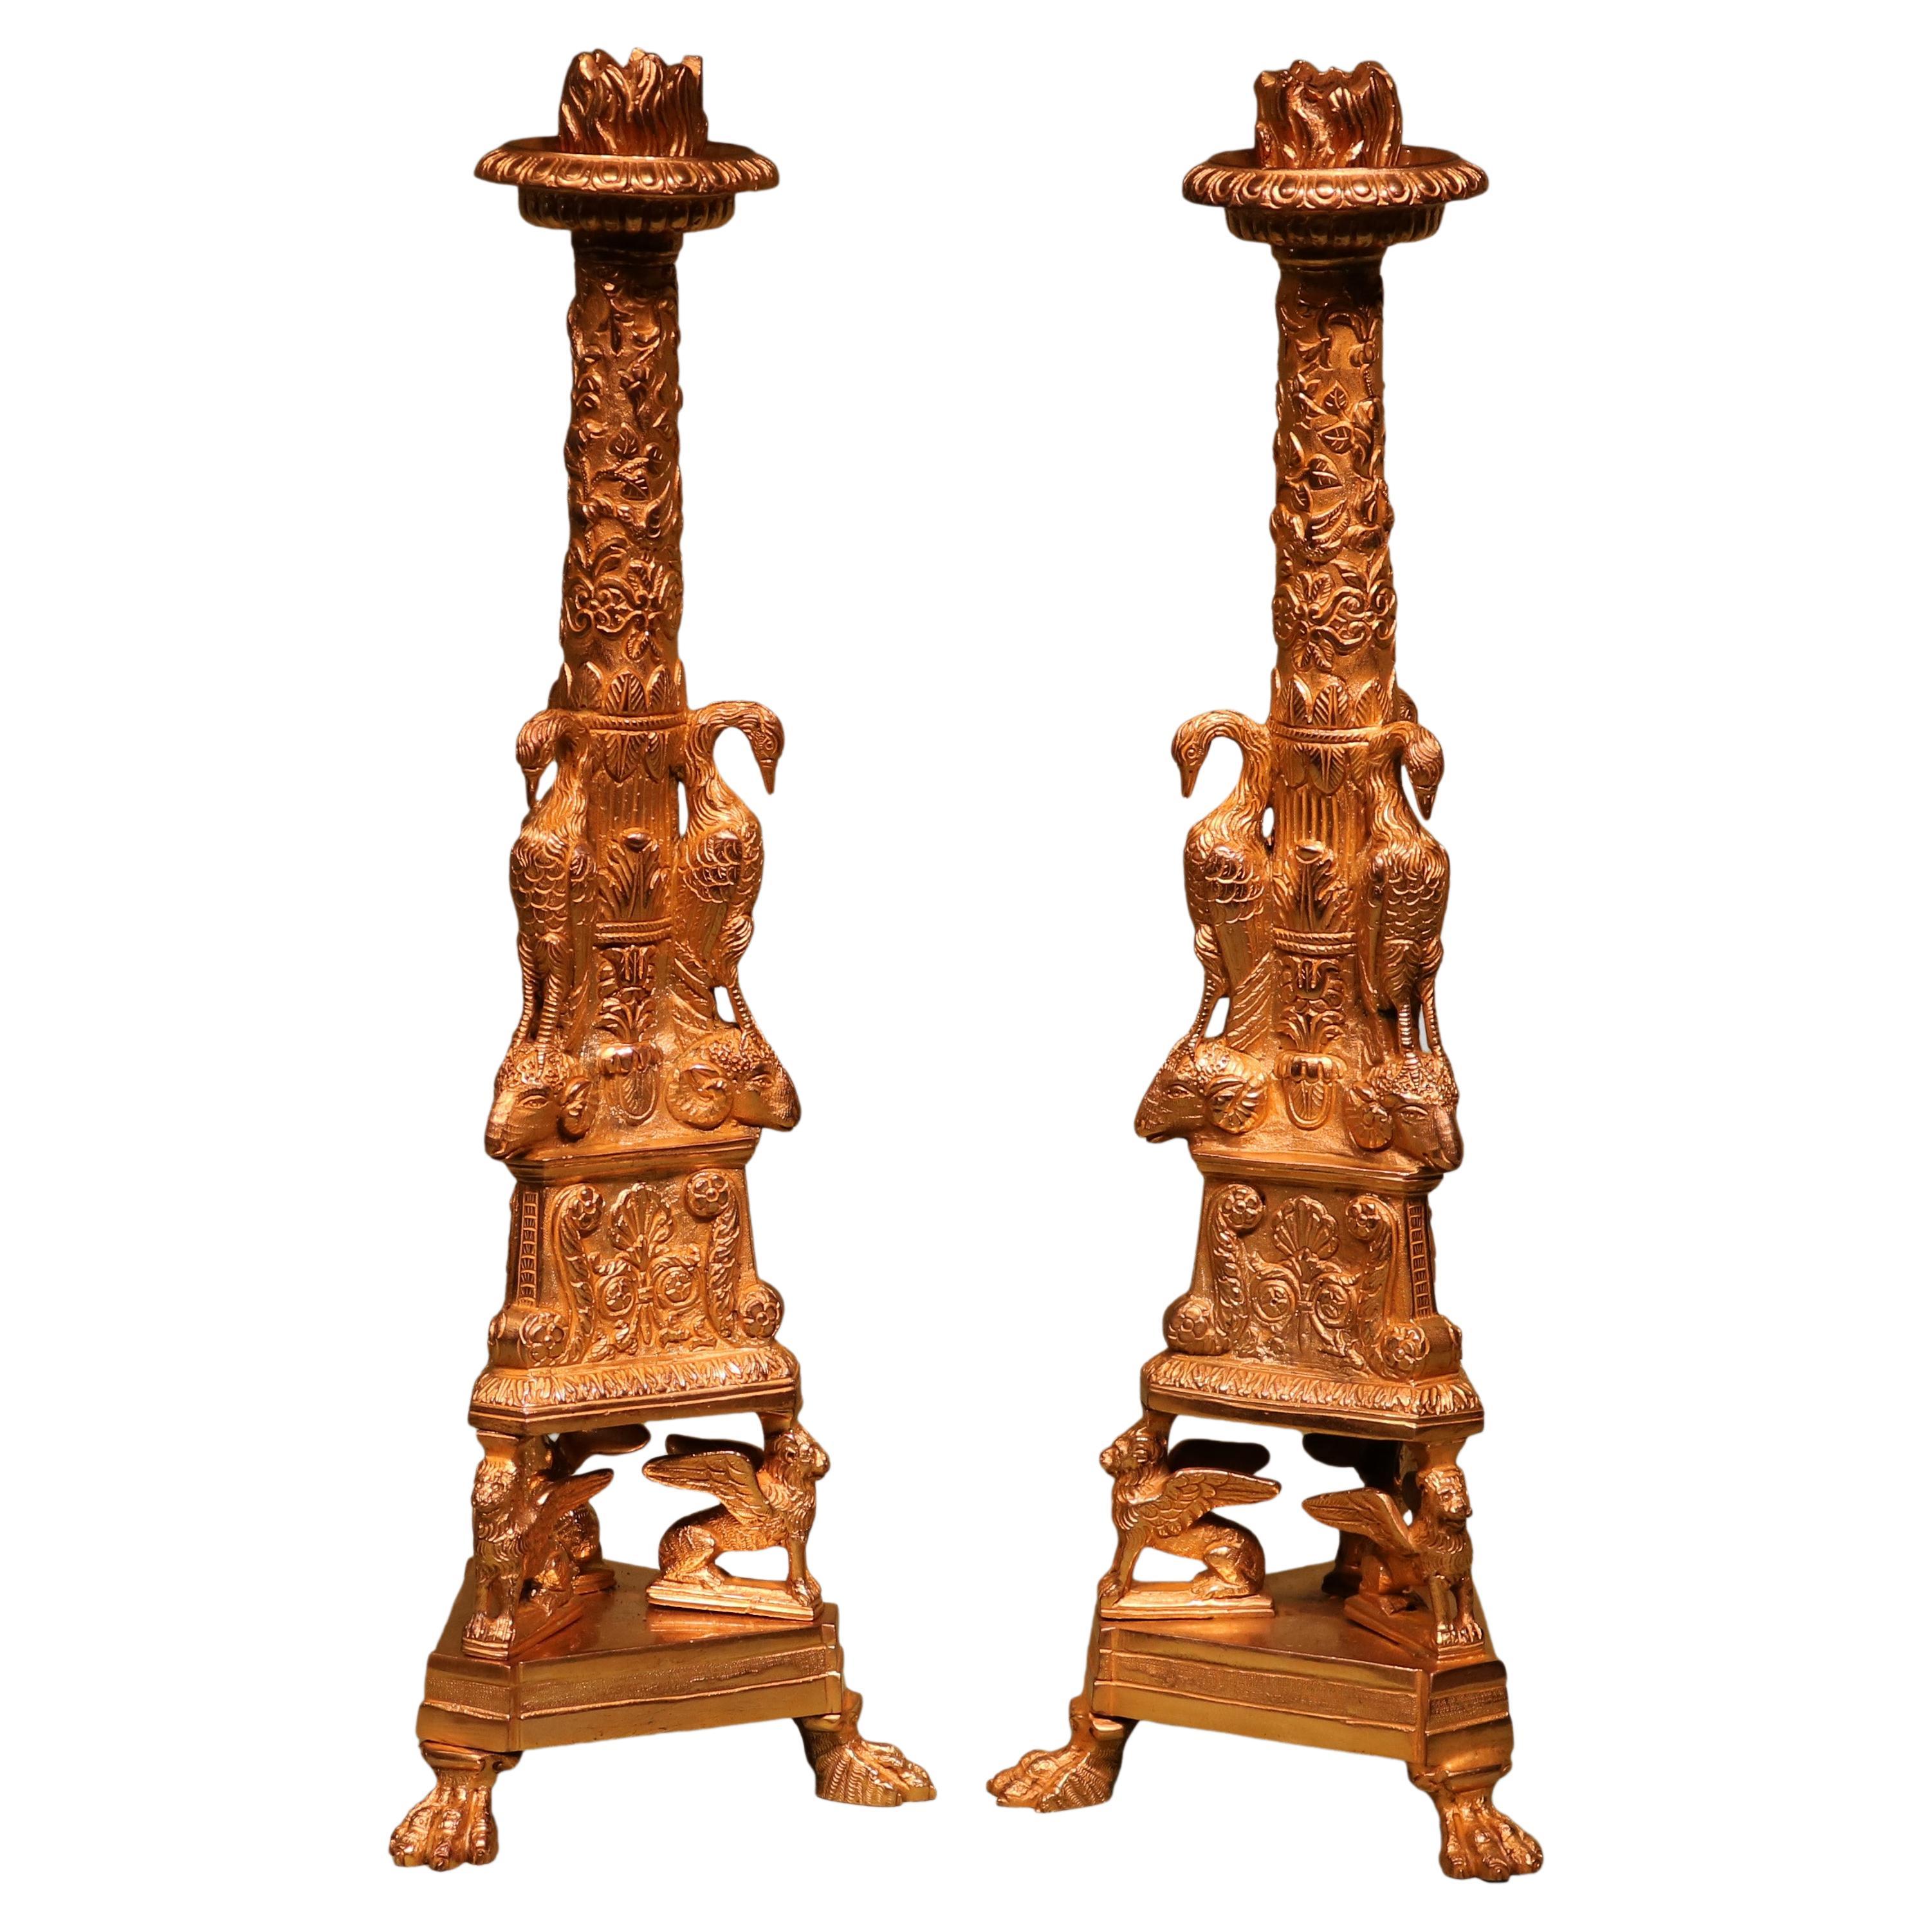 Antique Pair of Ormolu Triform Candlesticks in the Style of Piranesi